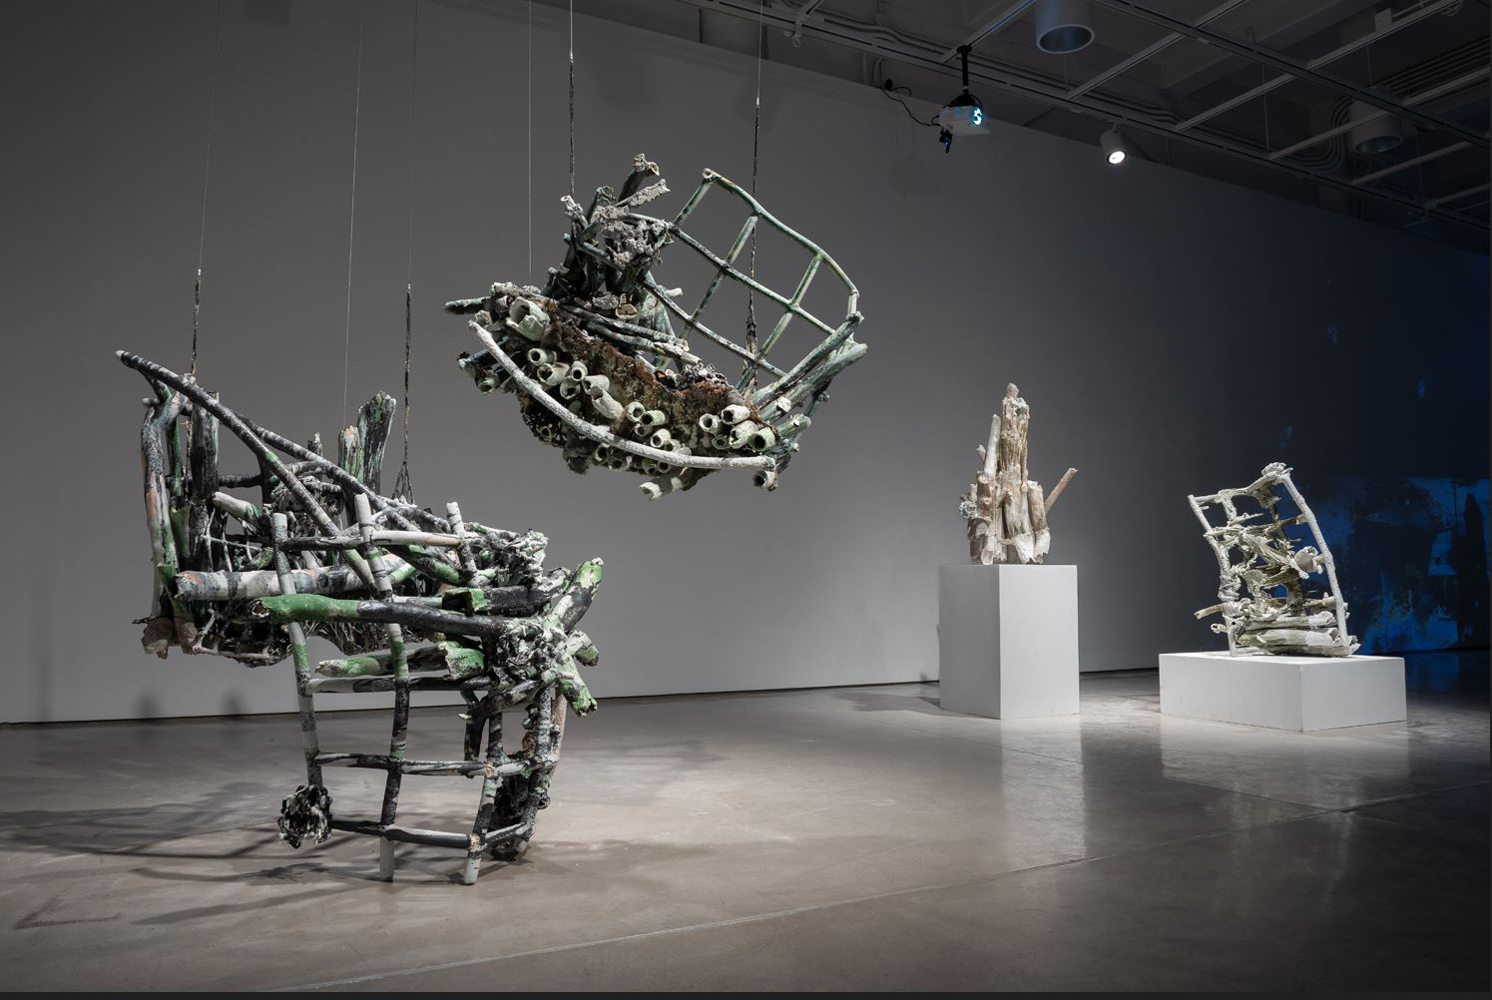 Installation image of a grouping of three large-scale grid sculptures, two of which are suspended by latex-coated nets. In the background, two more sculptures are visible on pedestals. 